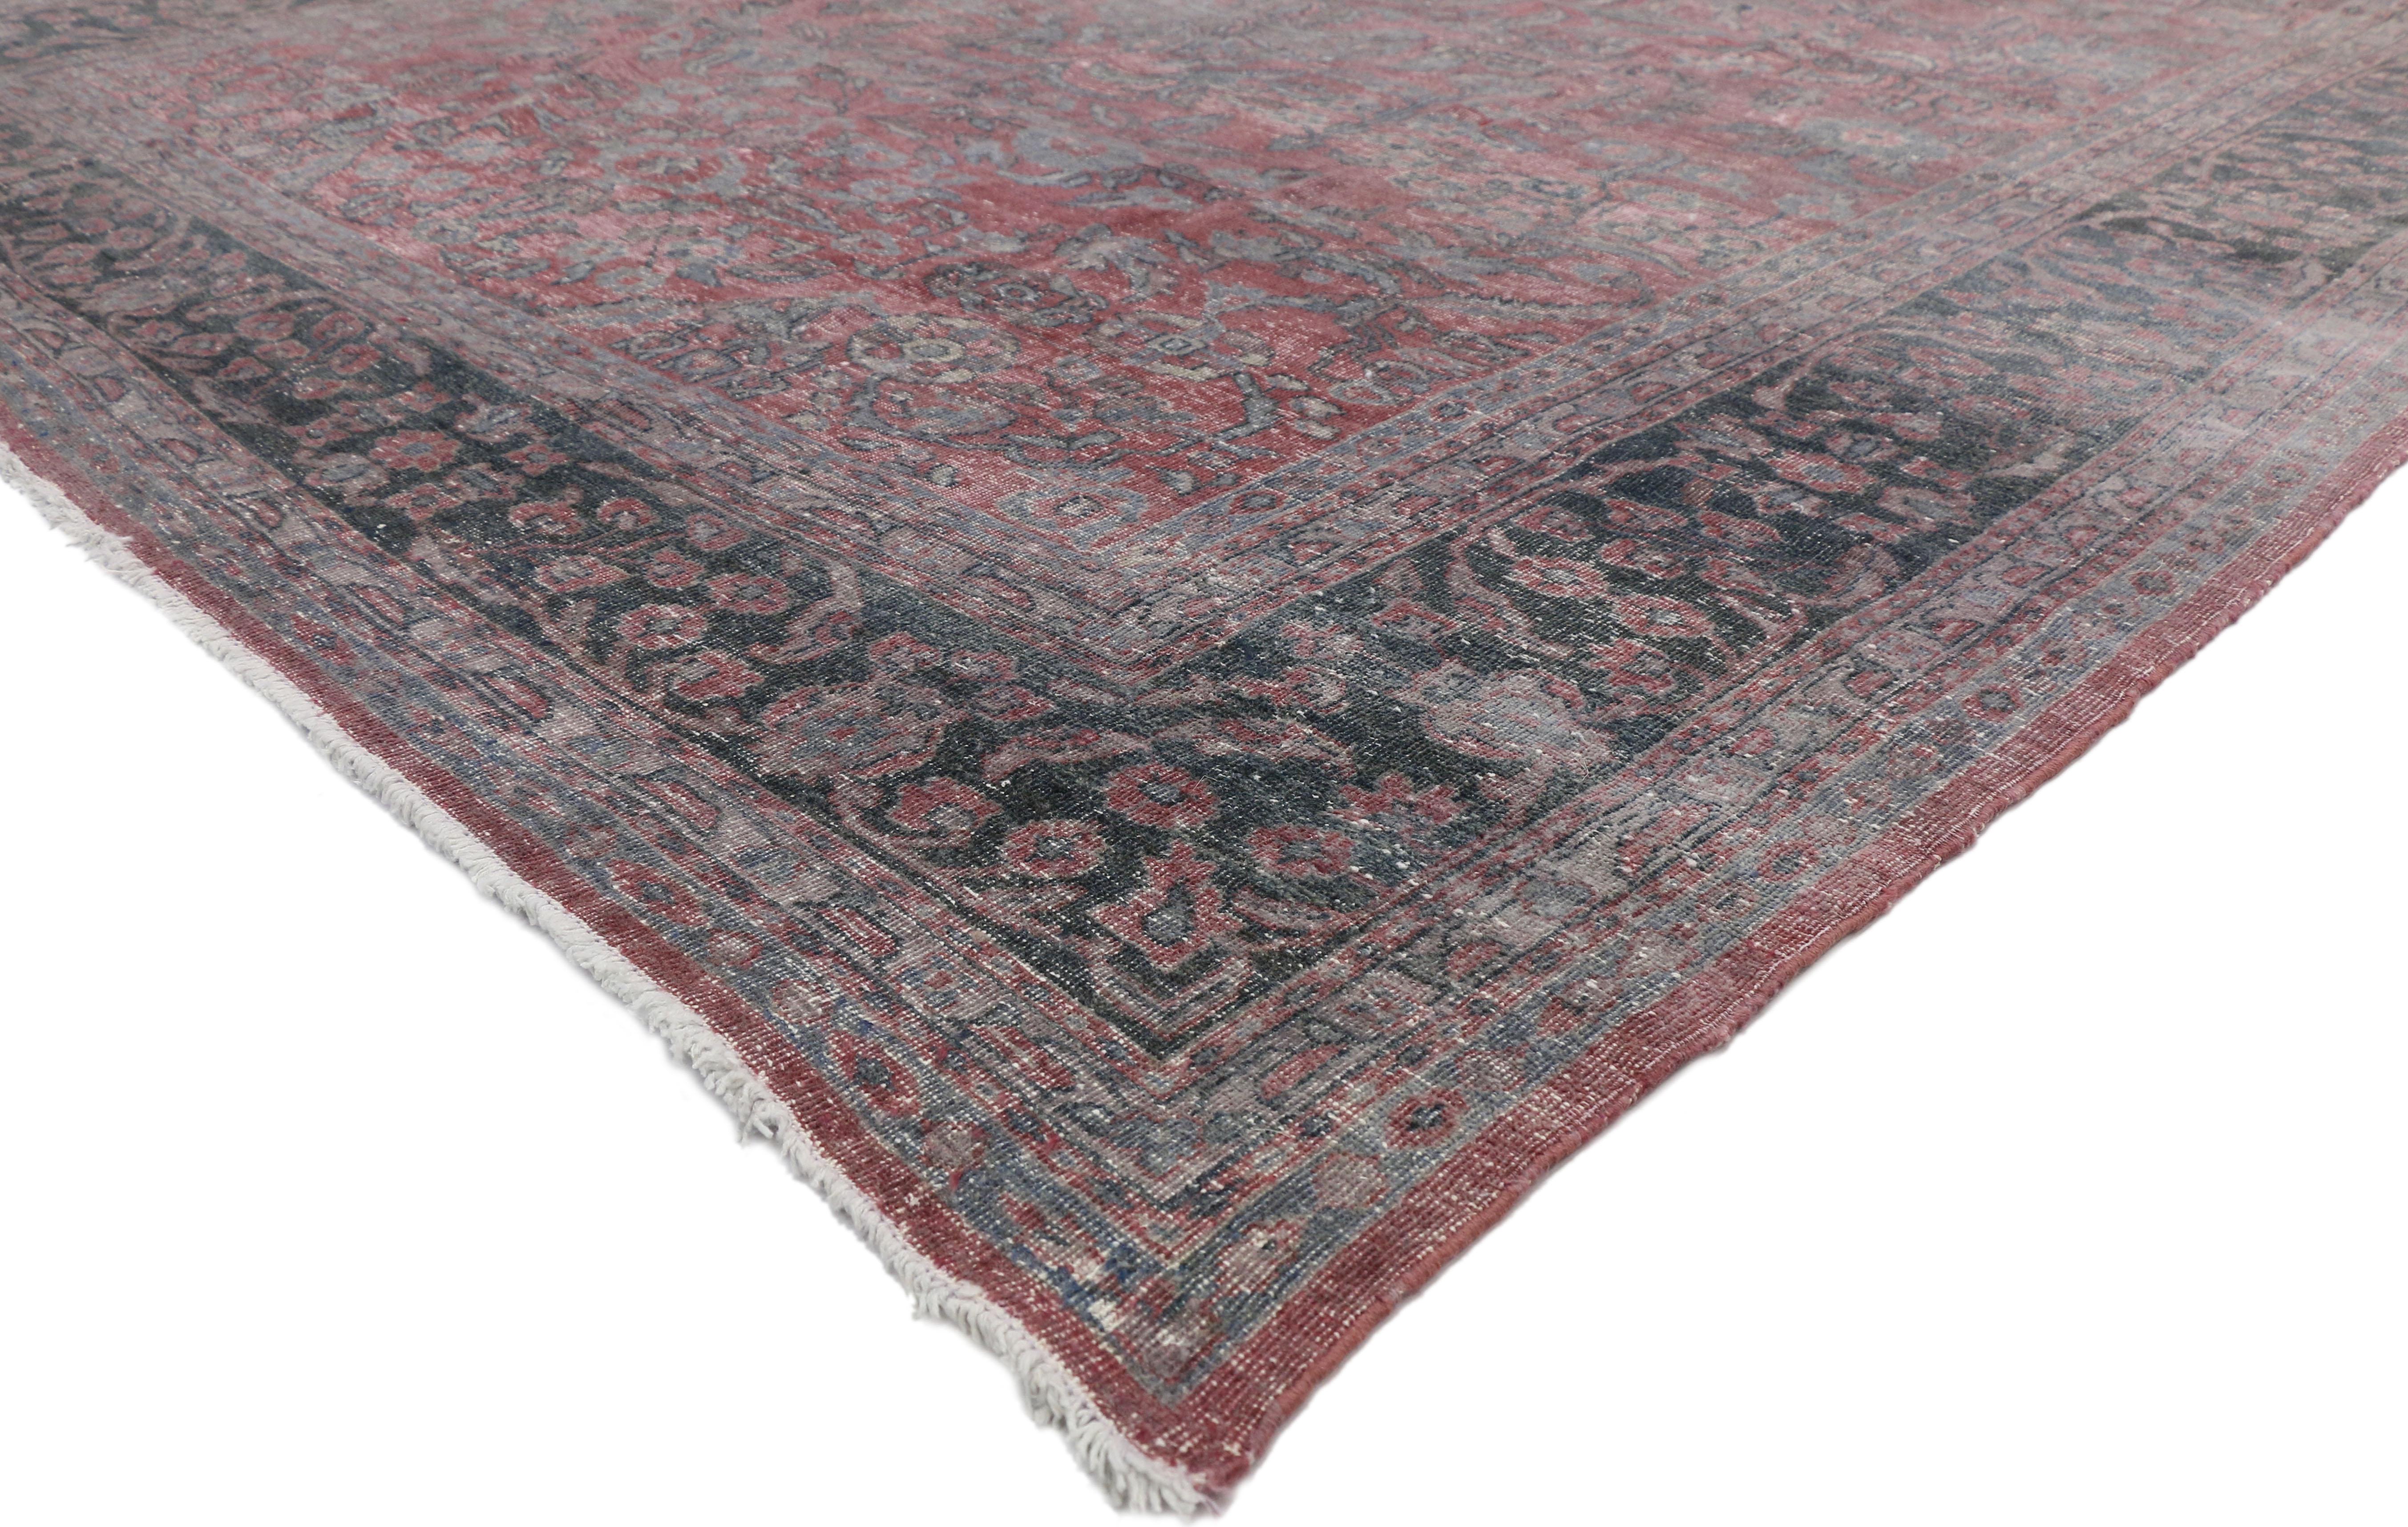 72868 Distressed Antique Persian Tabriz Area Rug with Feminine Industrial Style. This hand-knotted distressed antique Tabriz rug with feminine industrial style features a central medallion surrounded by an all-over floral pattern on a Marsala-wine